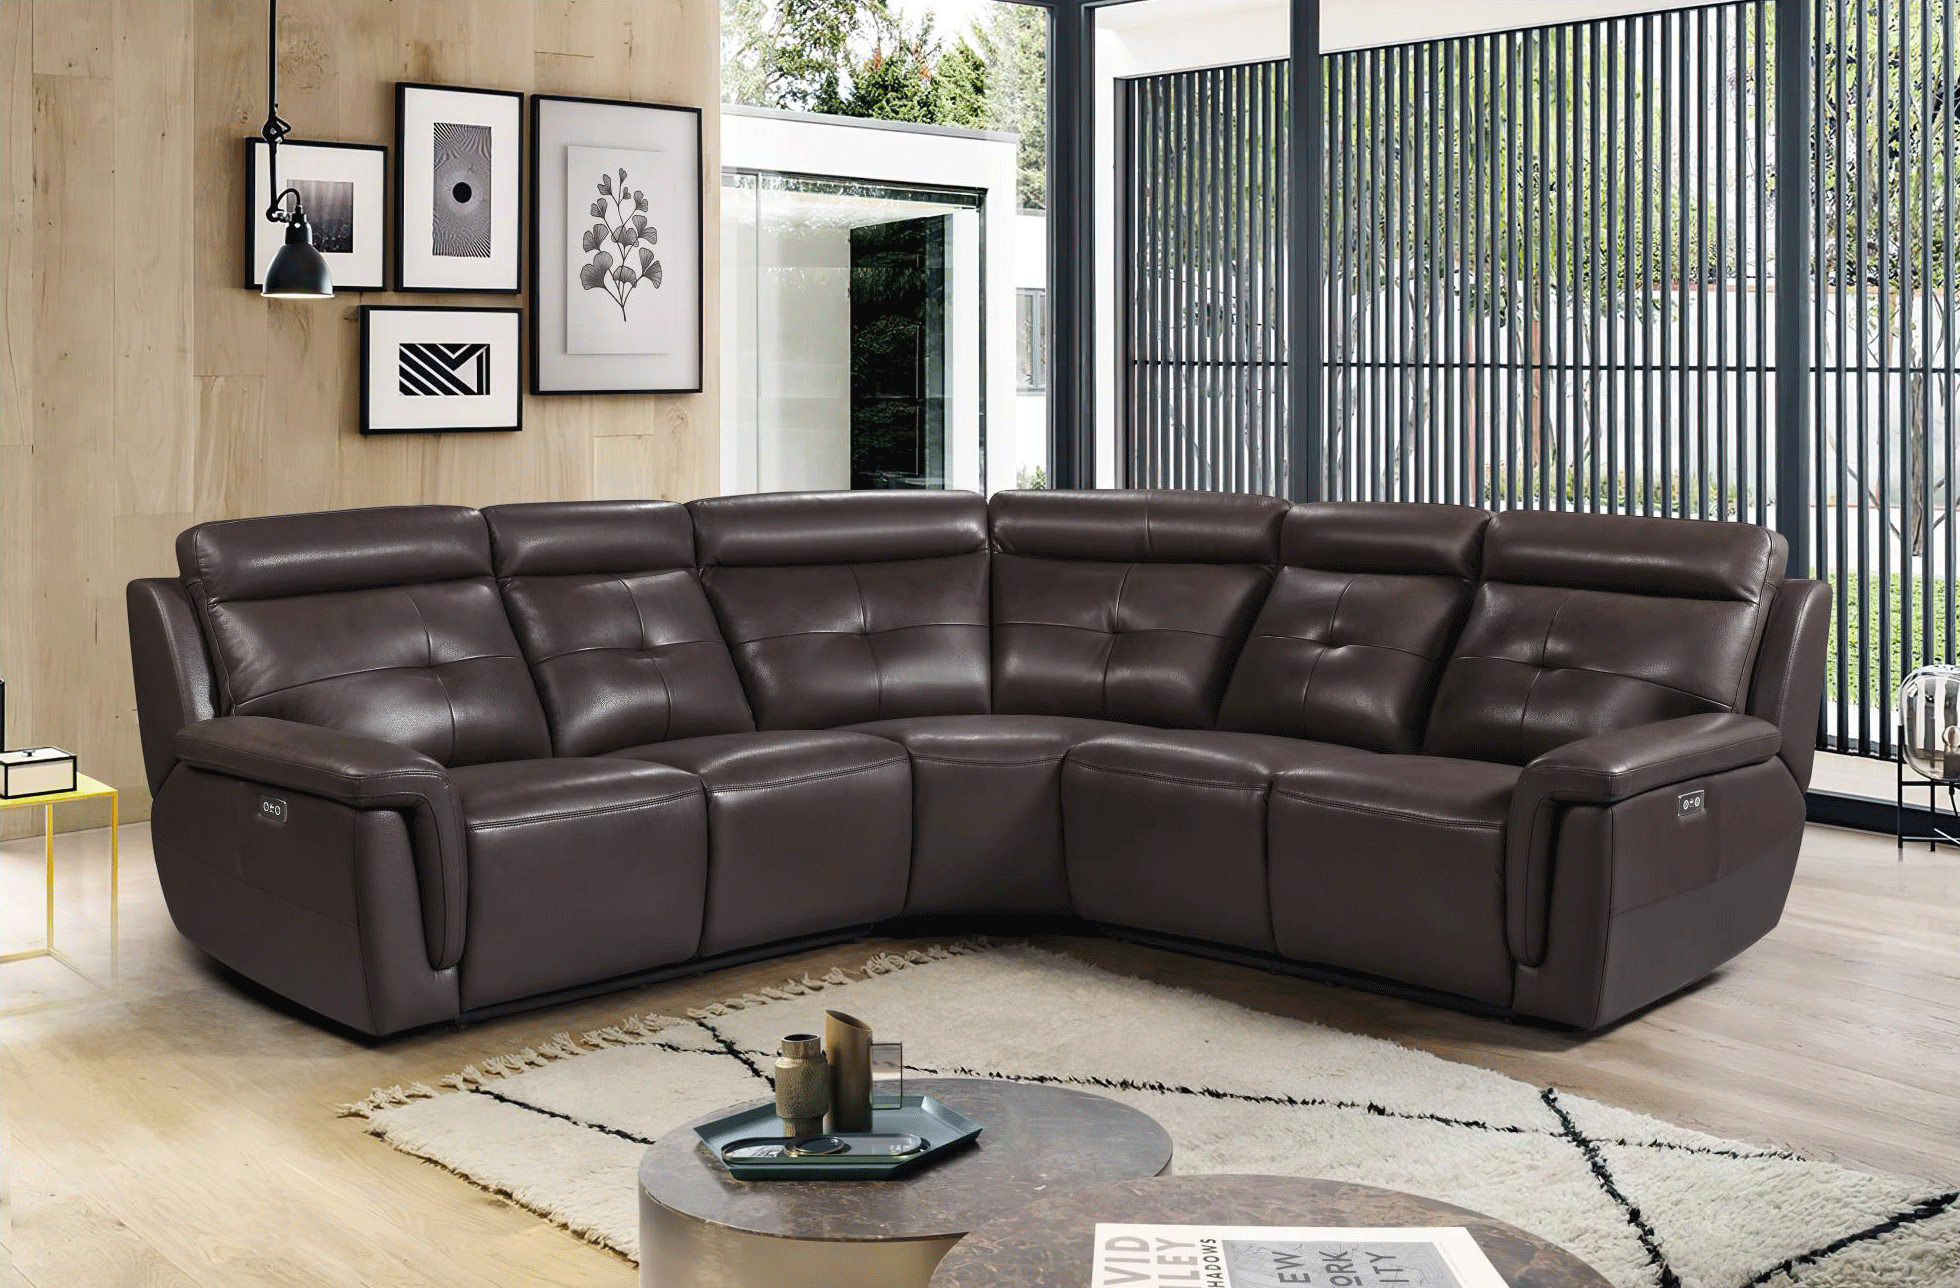 Brands IR Living Collection 2937 Sectional w/ electric recliners